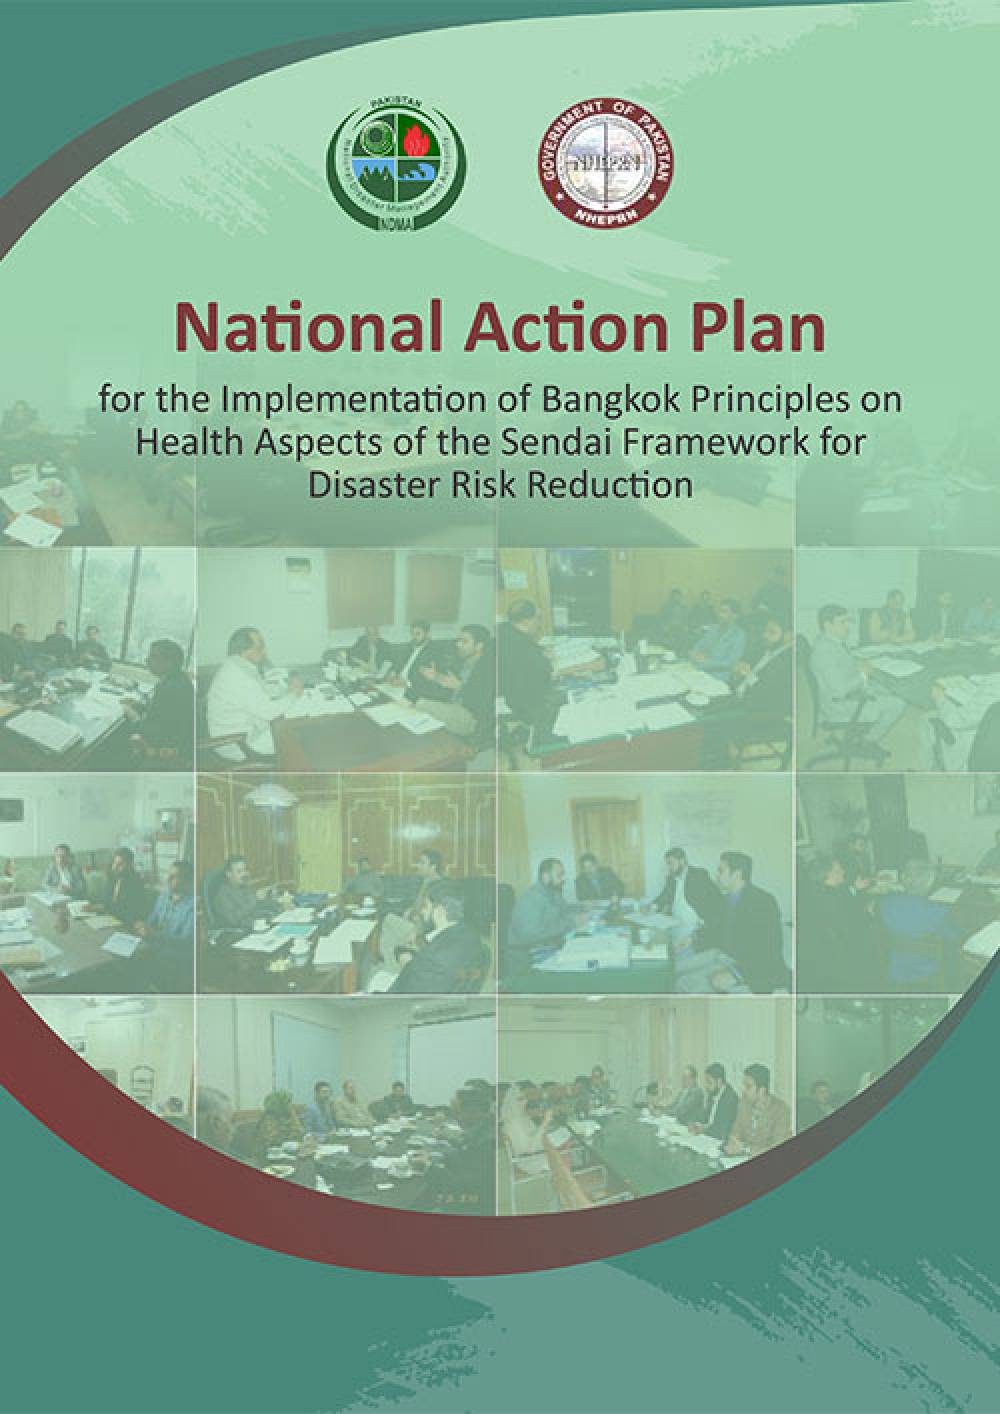 National Action Plane for the Implementation of Bangkok Principles on Health Aspects of the SFDR